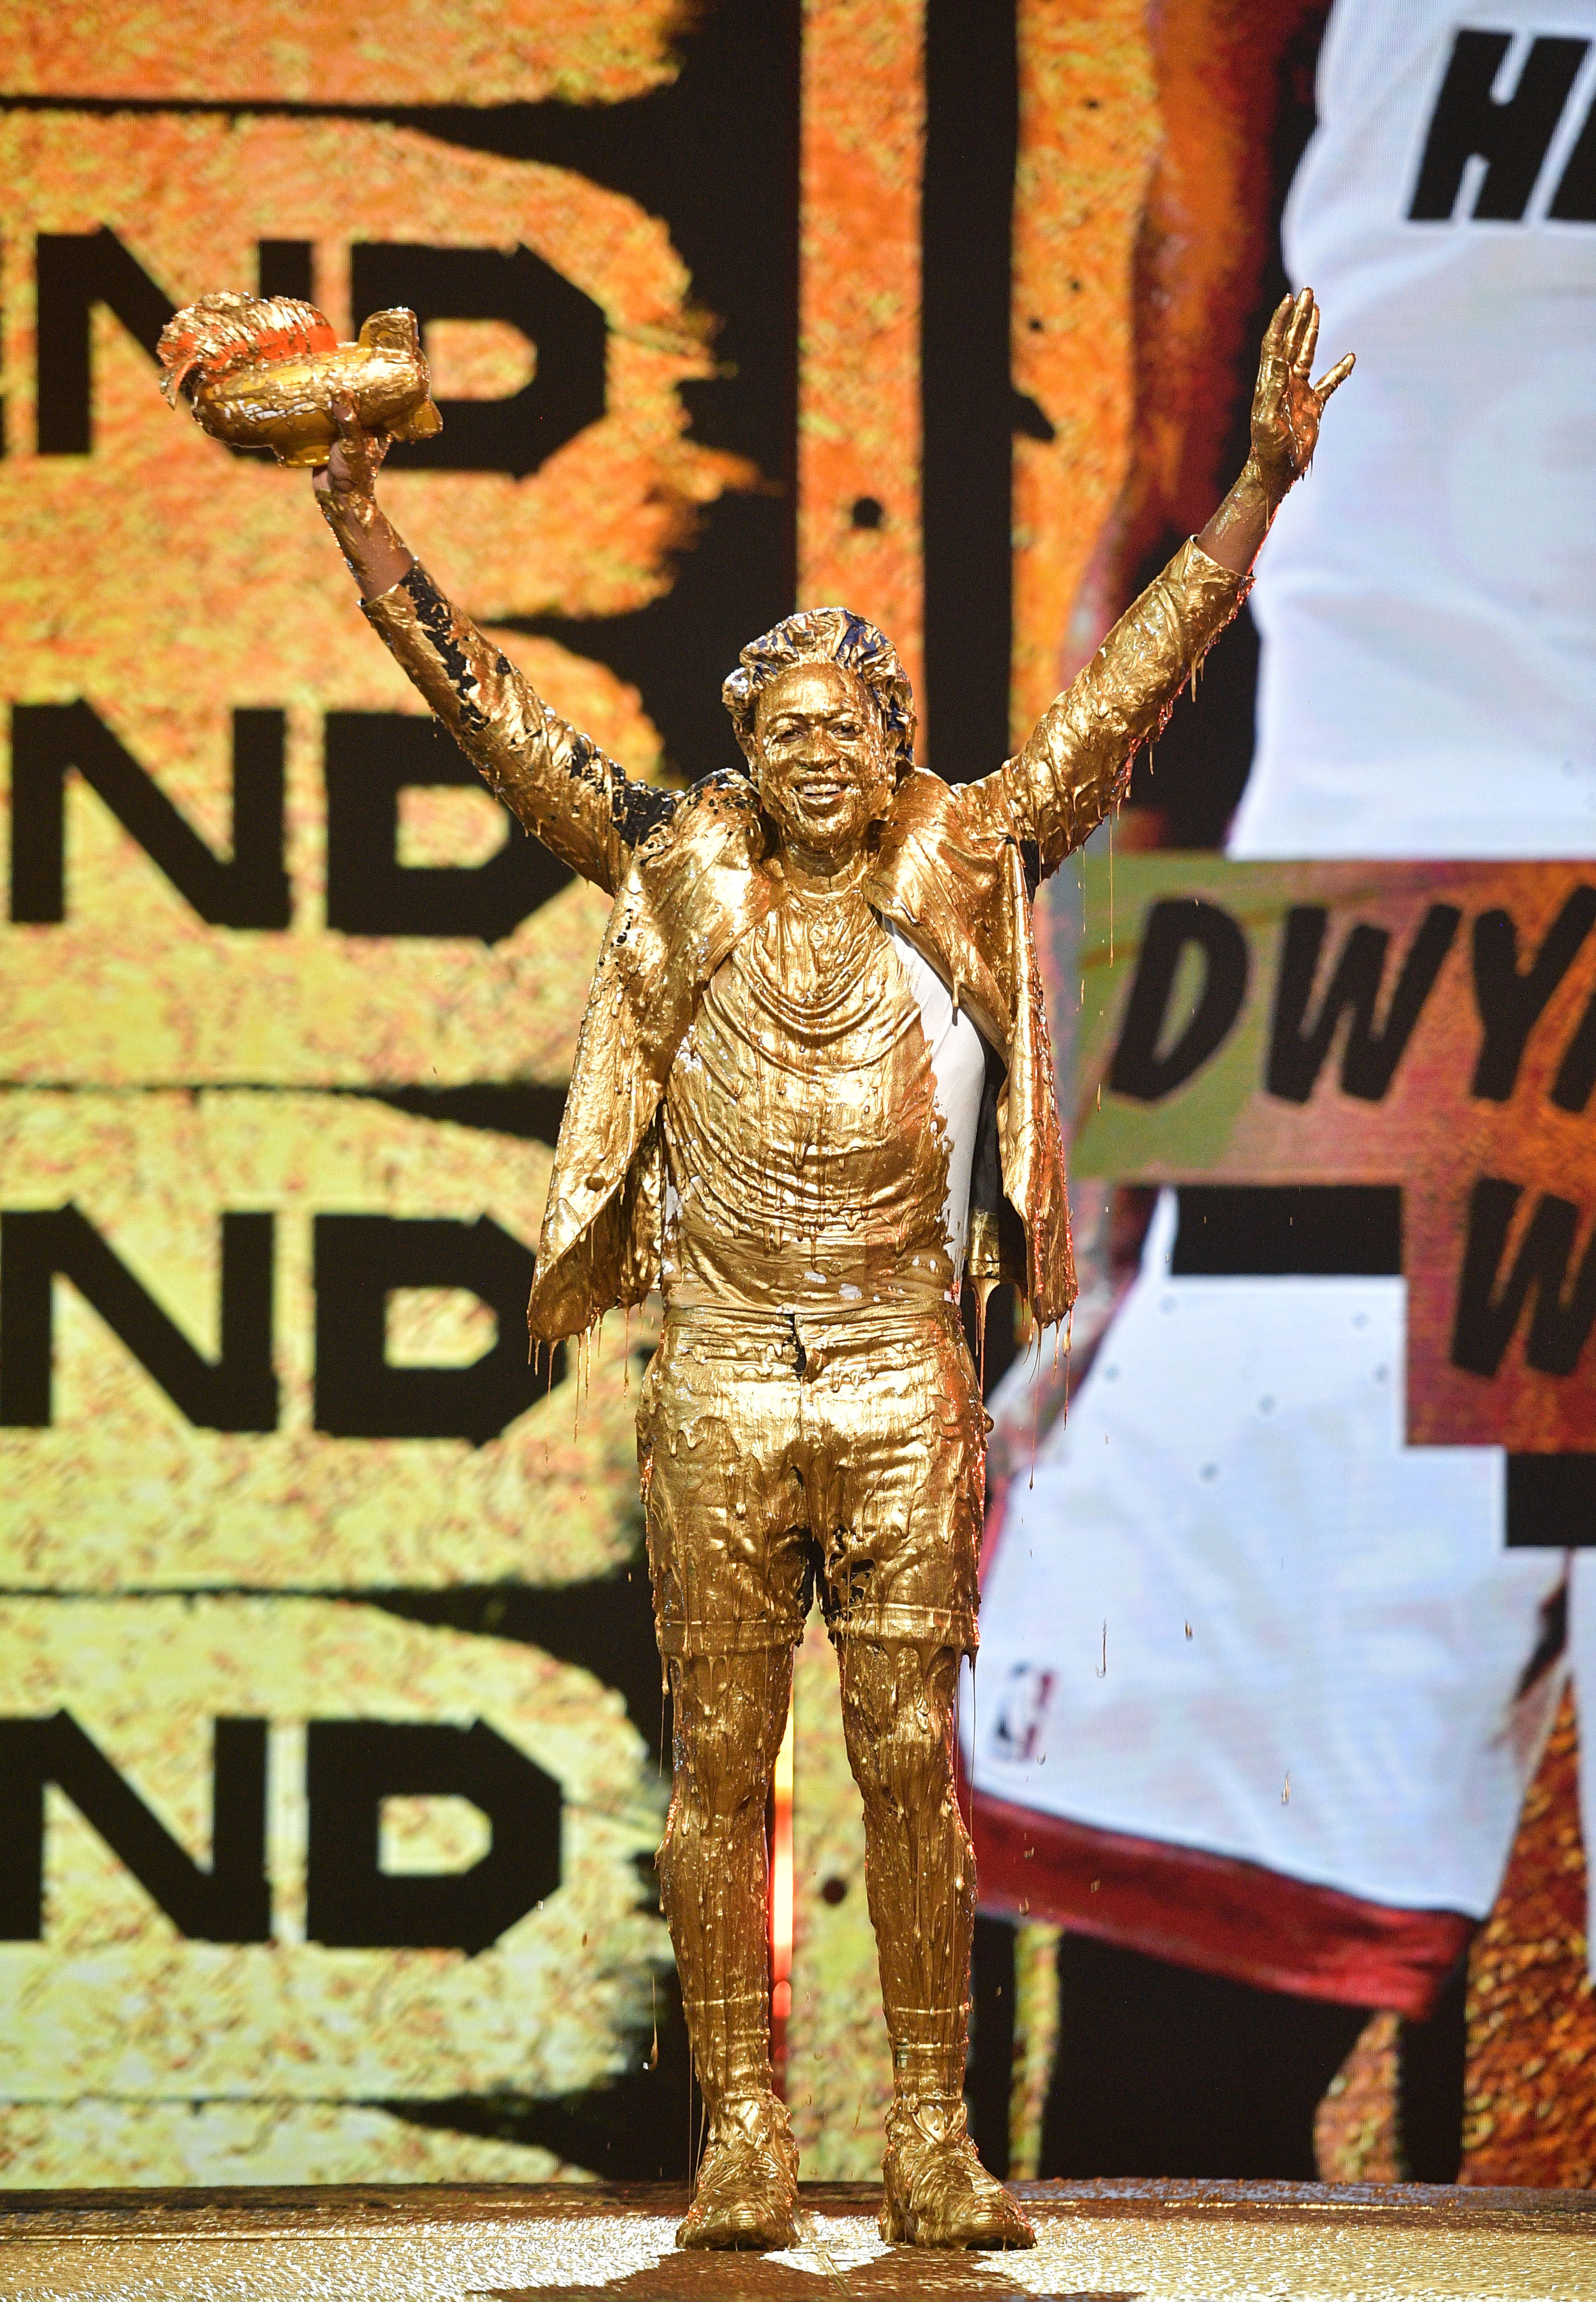 Dwyane Wade gets slimed while accepting the Legend Award onstage during Nickelodeon Kids' Choice Sports 2019 at Barker Hangar on July 11, 2019 in Santa Monica, California. (Photo by Matt Winkelmeyer/KCASports2019/Getty Images for Nickelodeon)